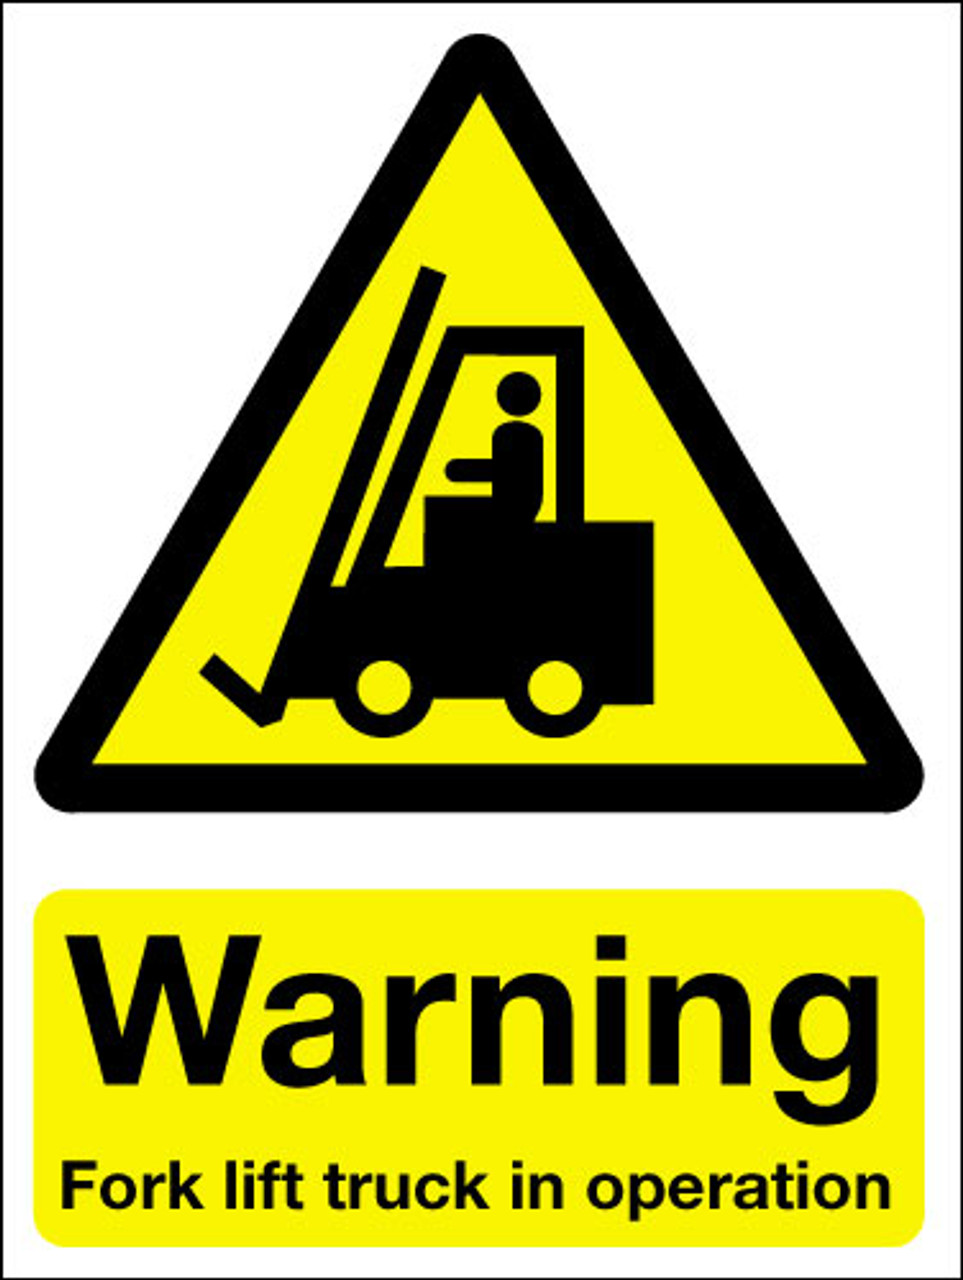 Warning fork lift truck in operation sign